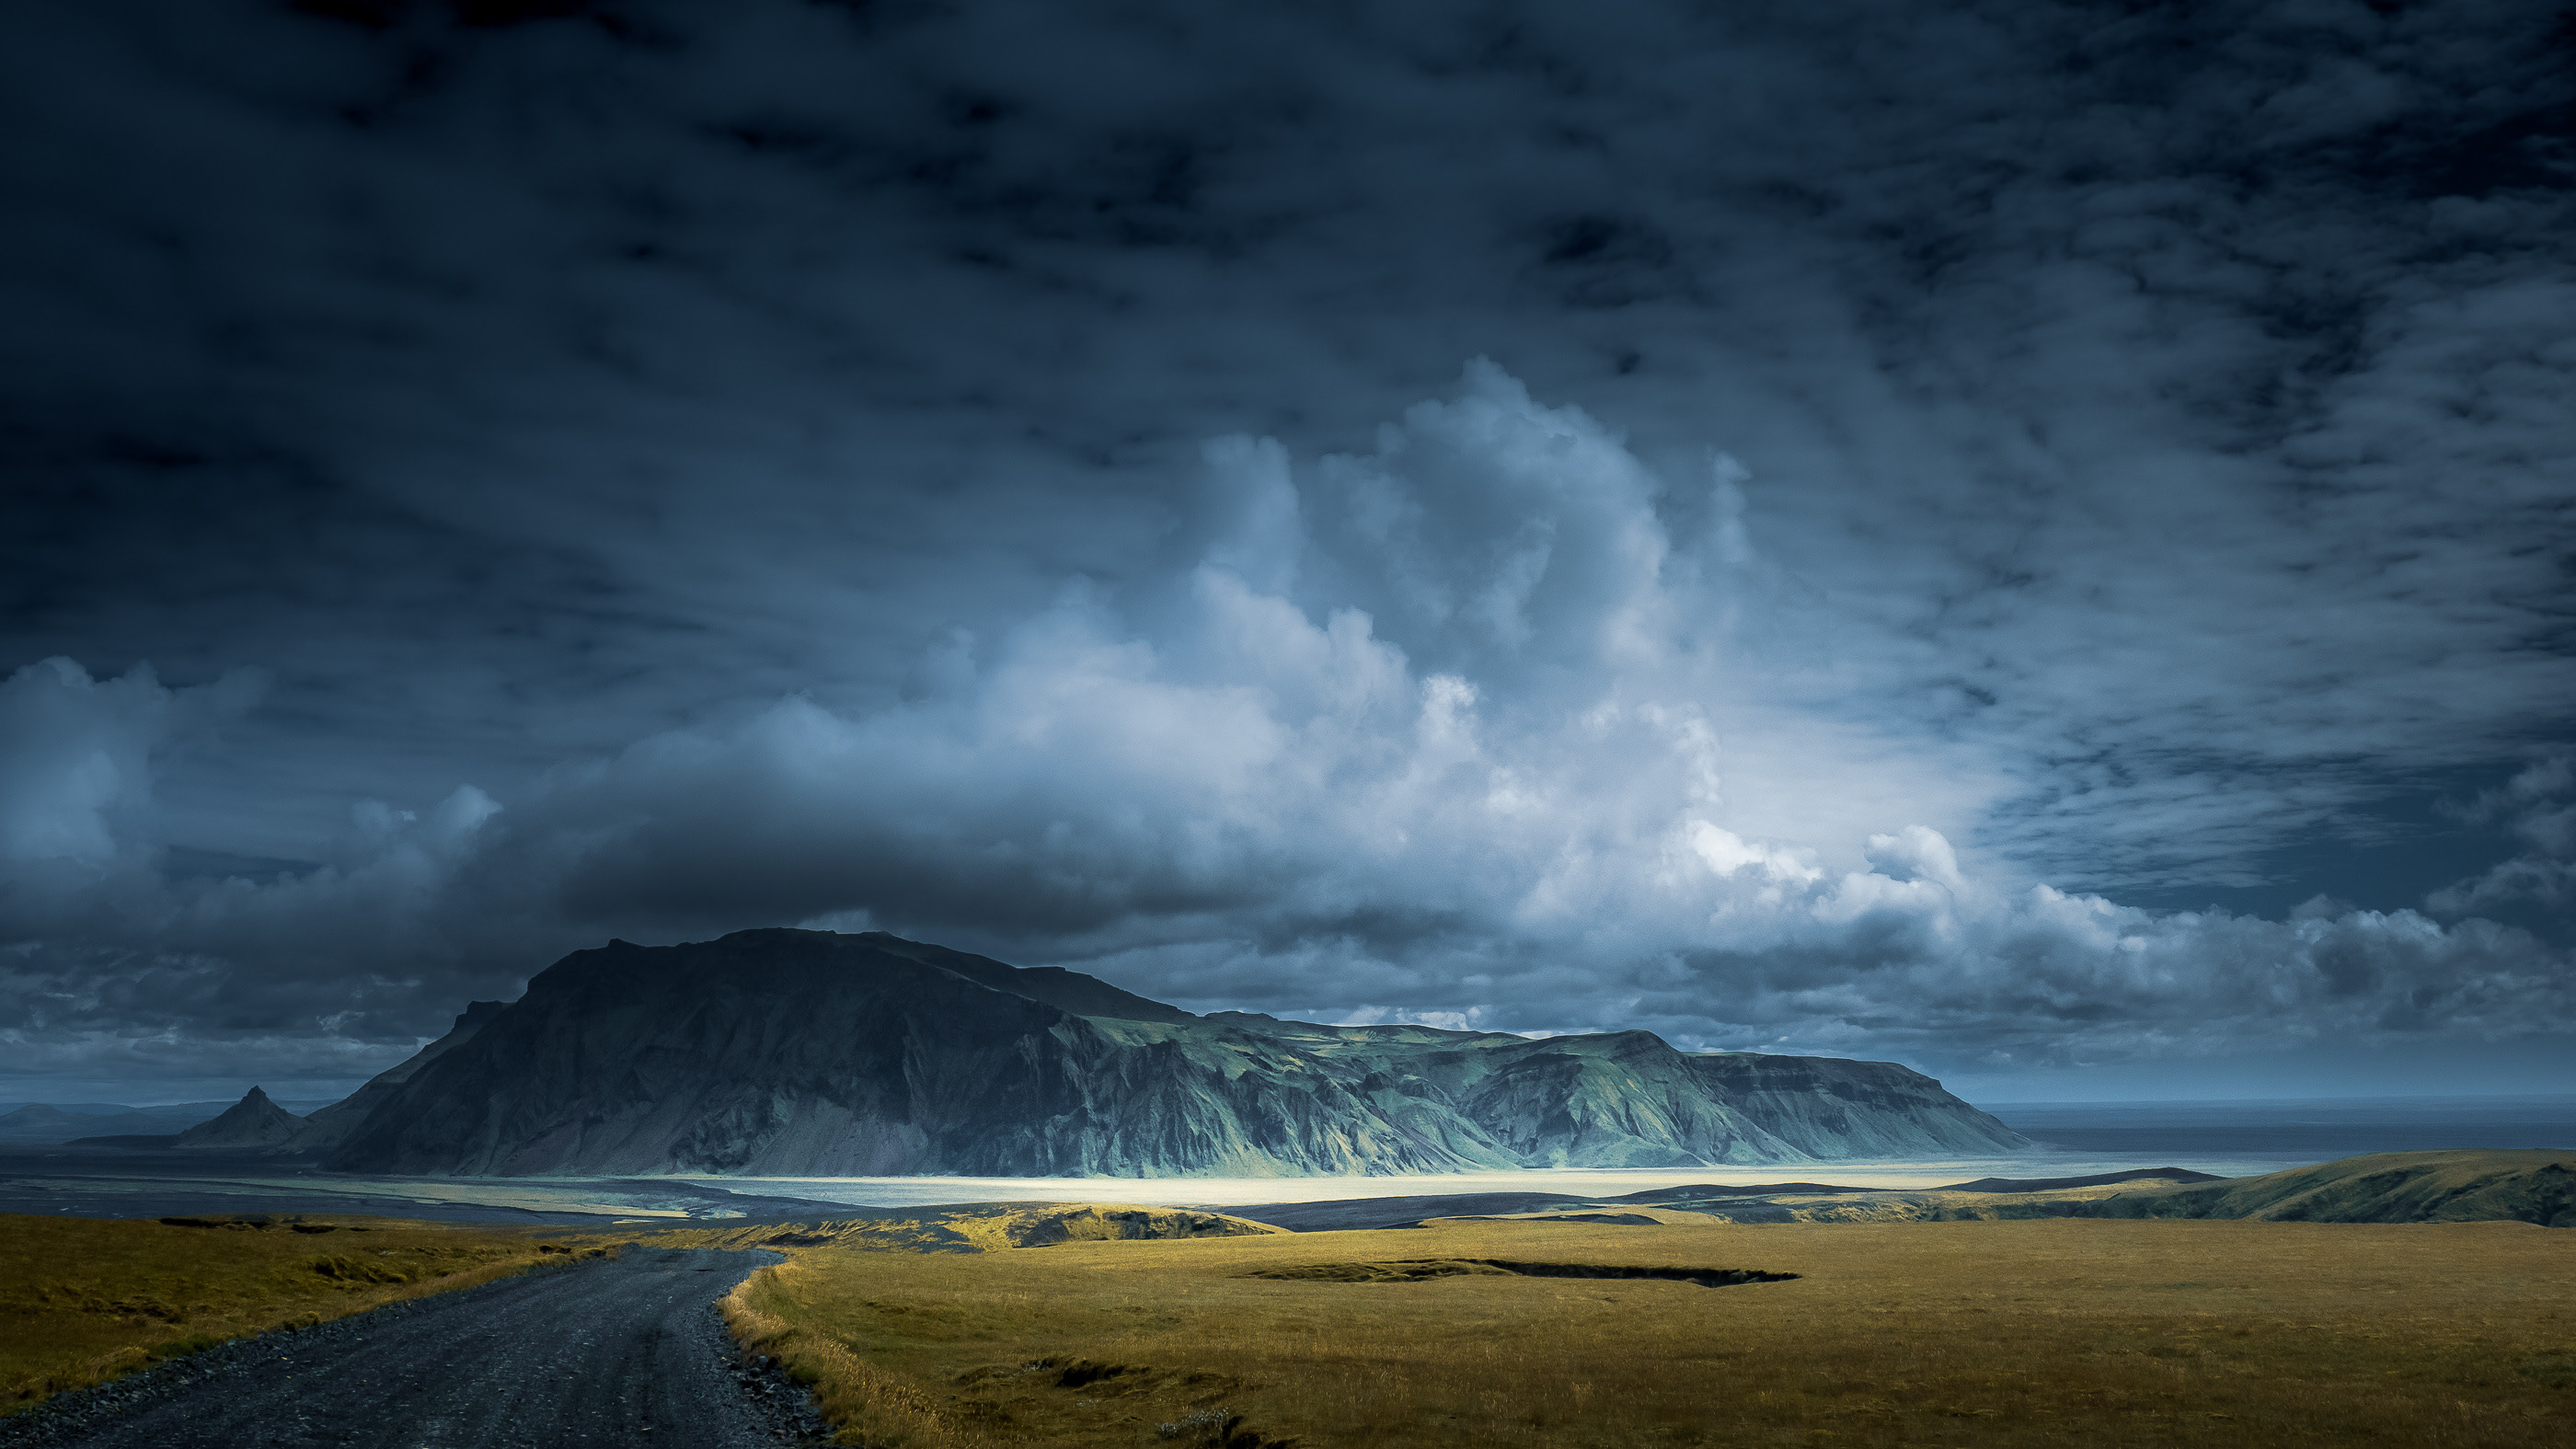 Photography Landscape Nature Mountains Clouds Road Sky Iceland Beach Field Behance 2800x1575